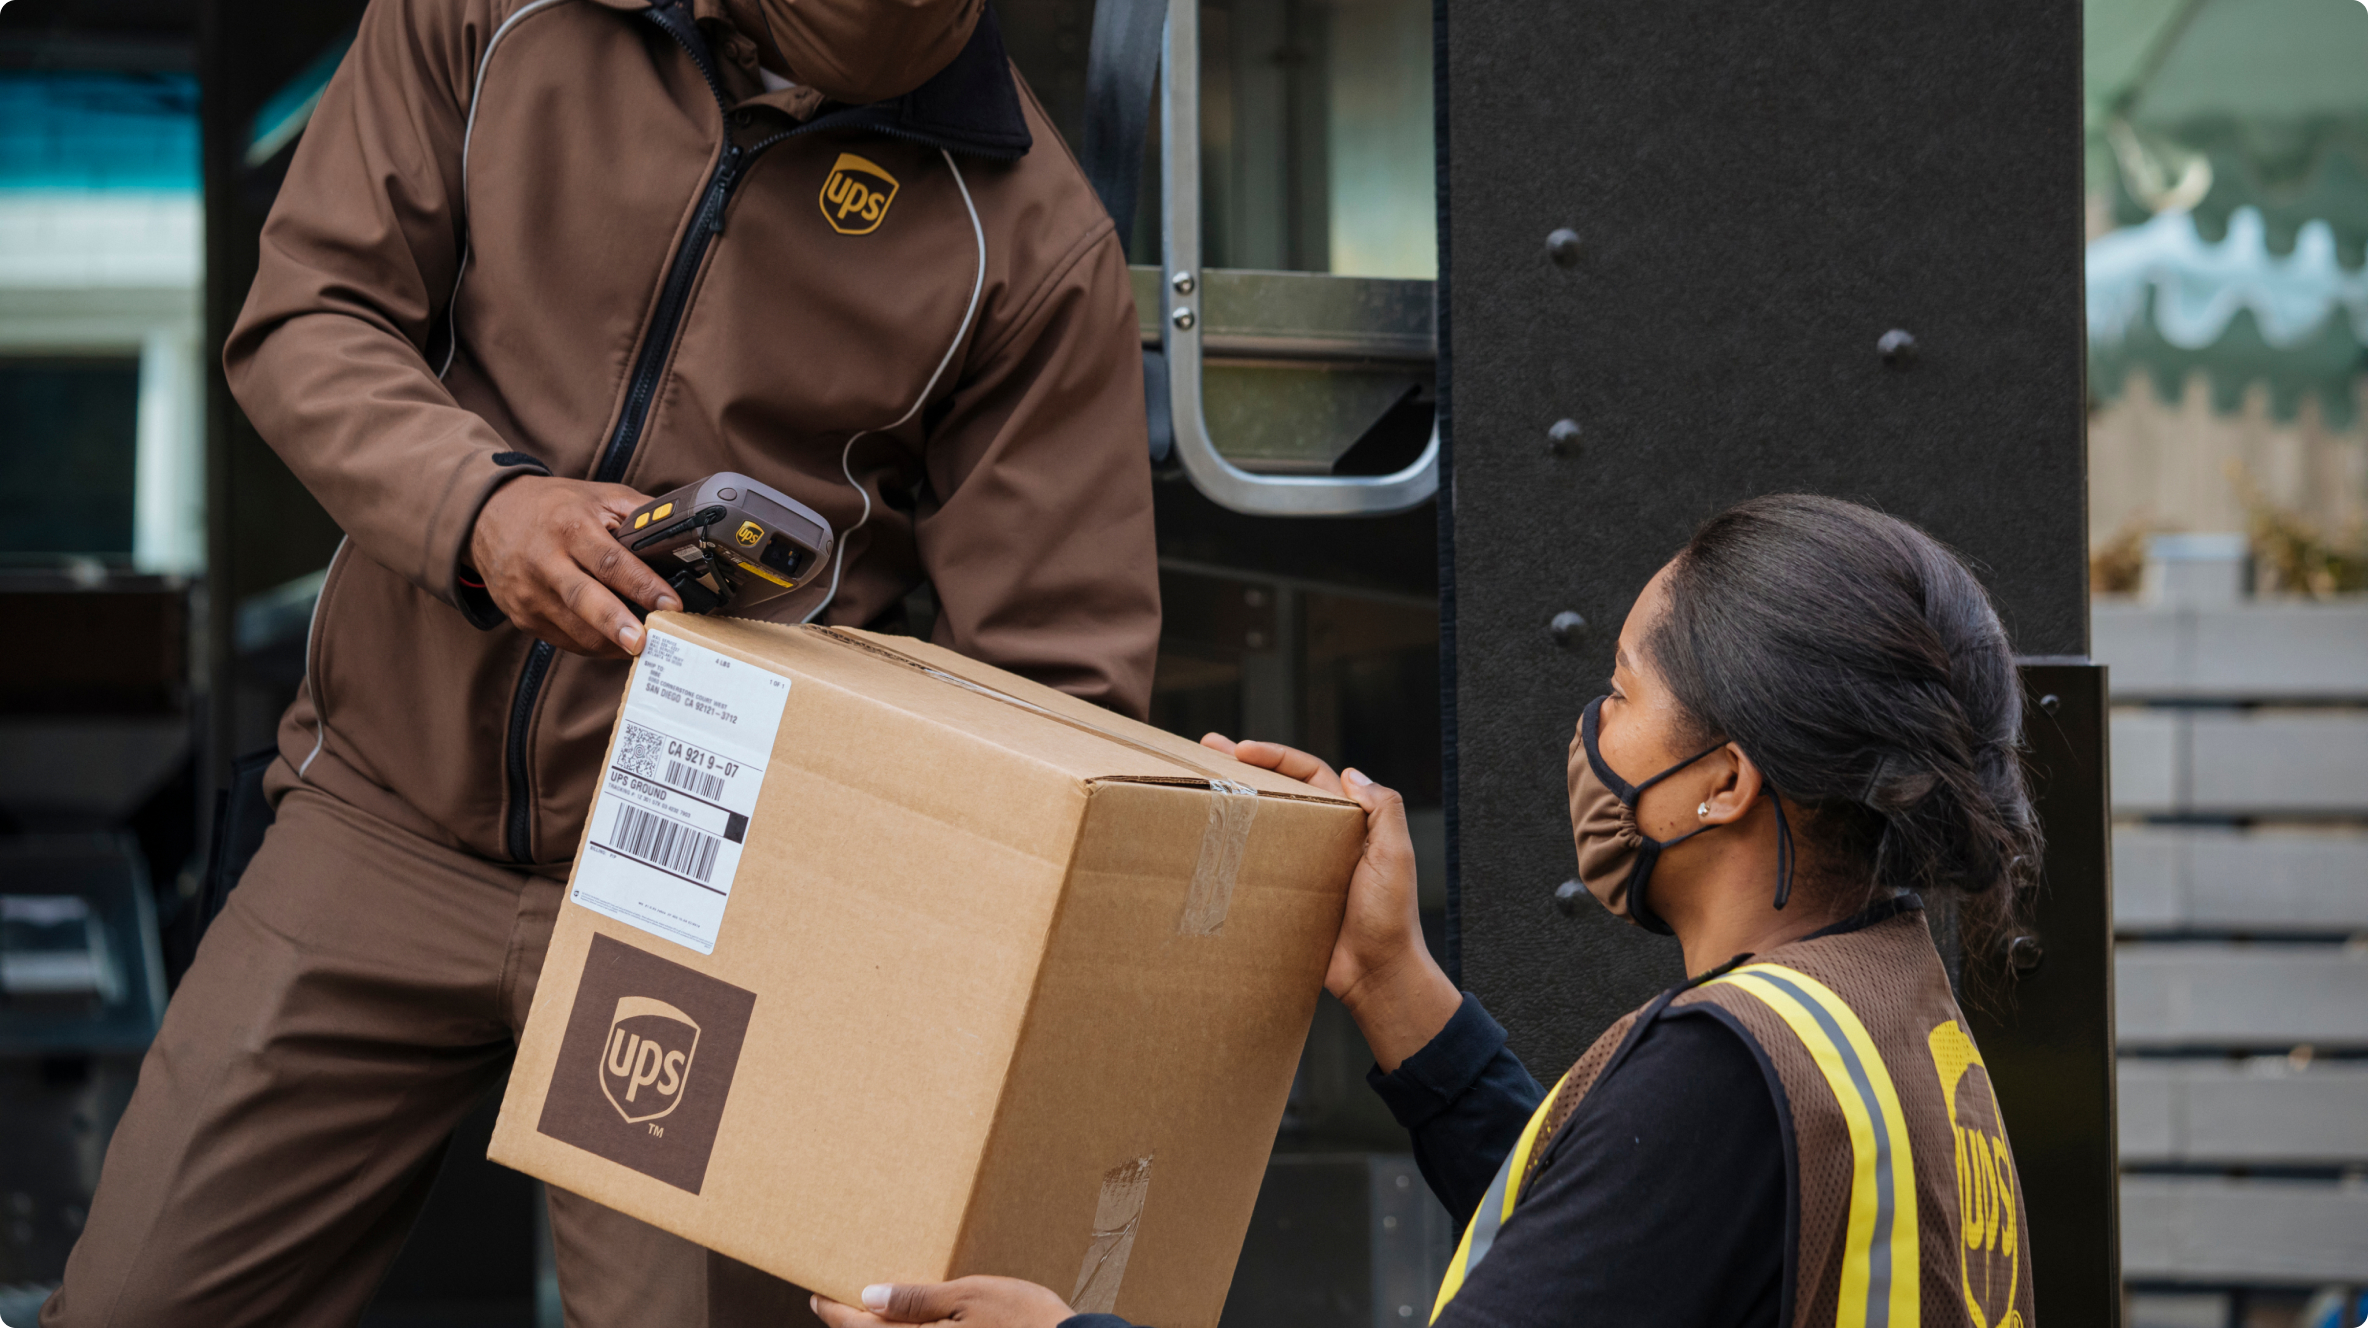  Male UPS worker handing a package from a truck to a female UPS worker